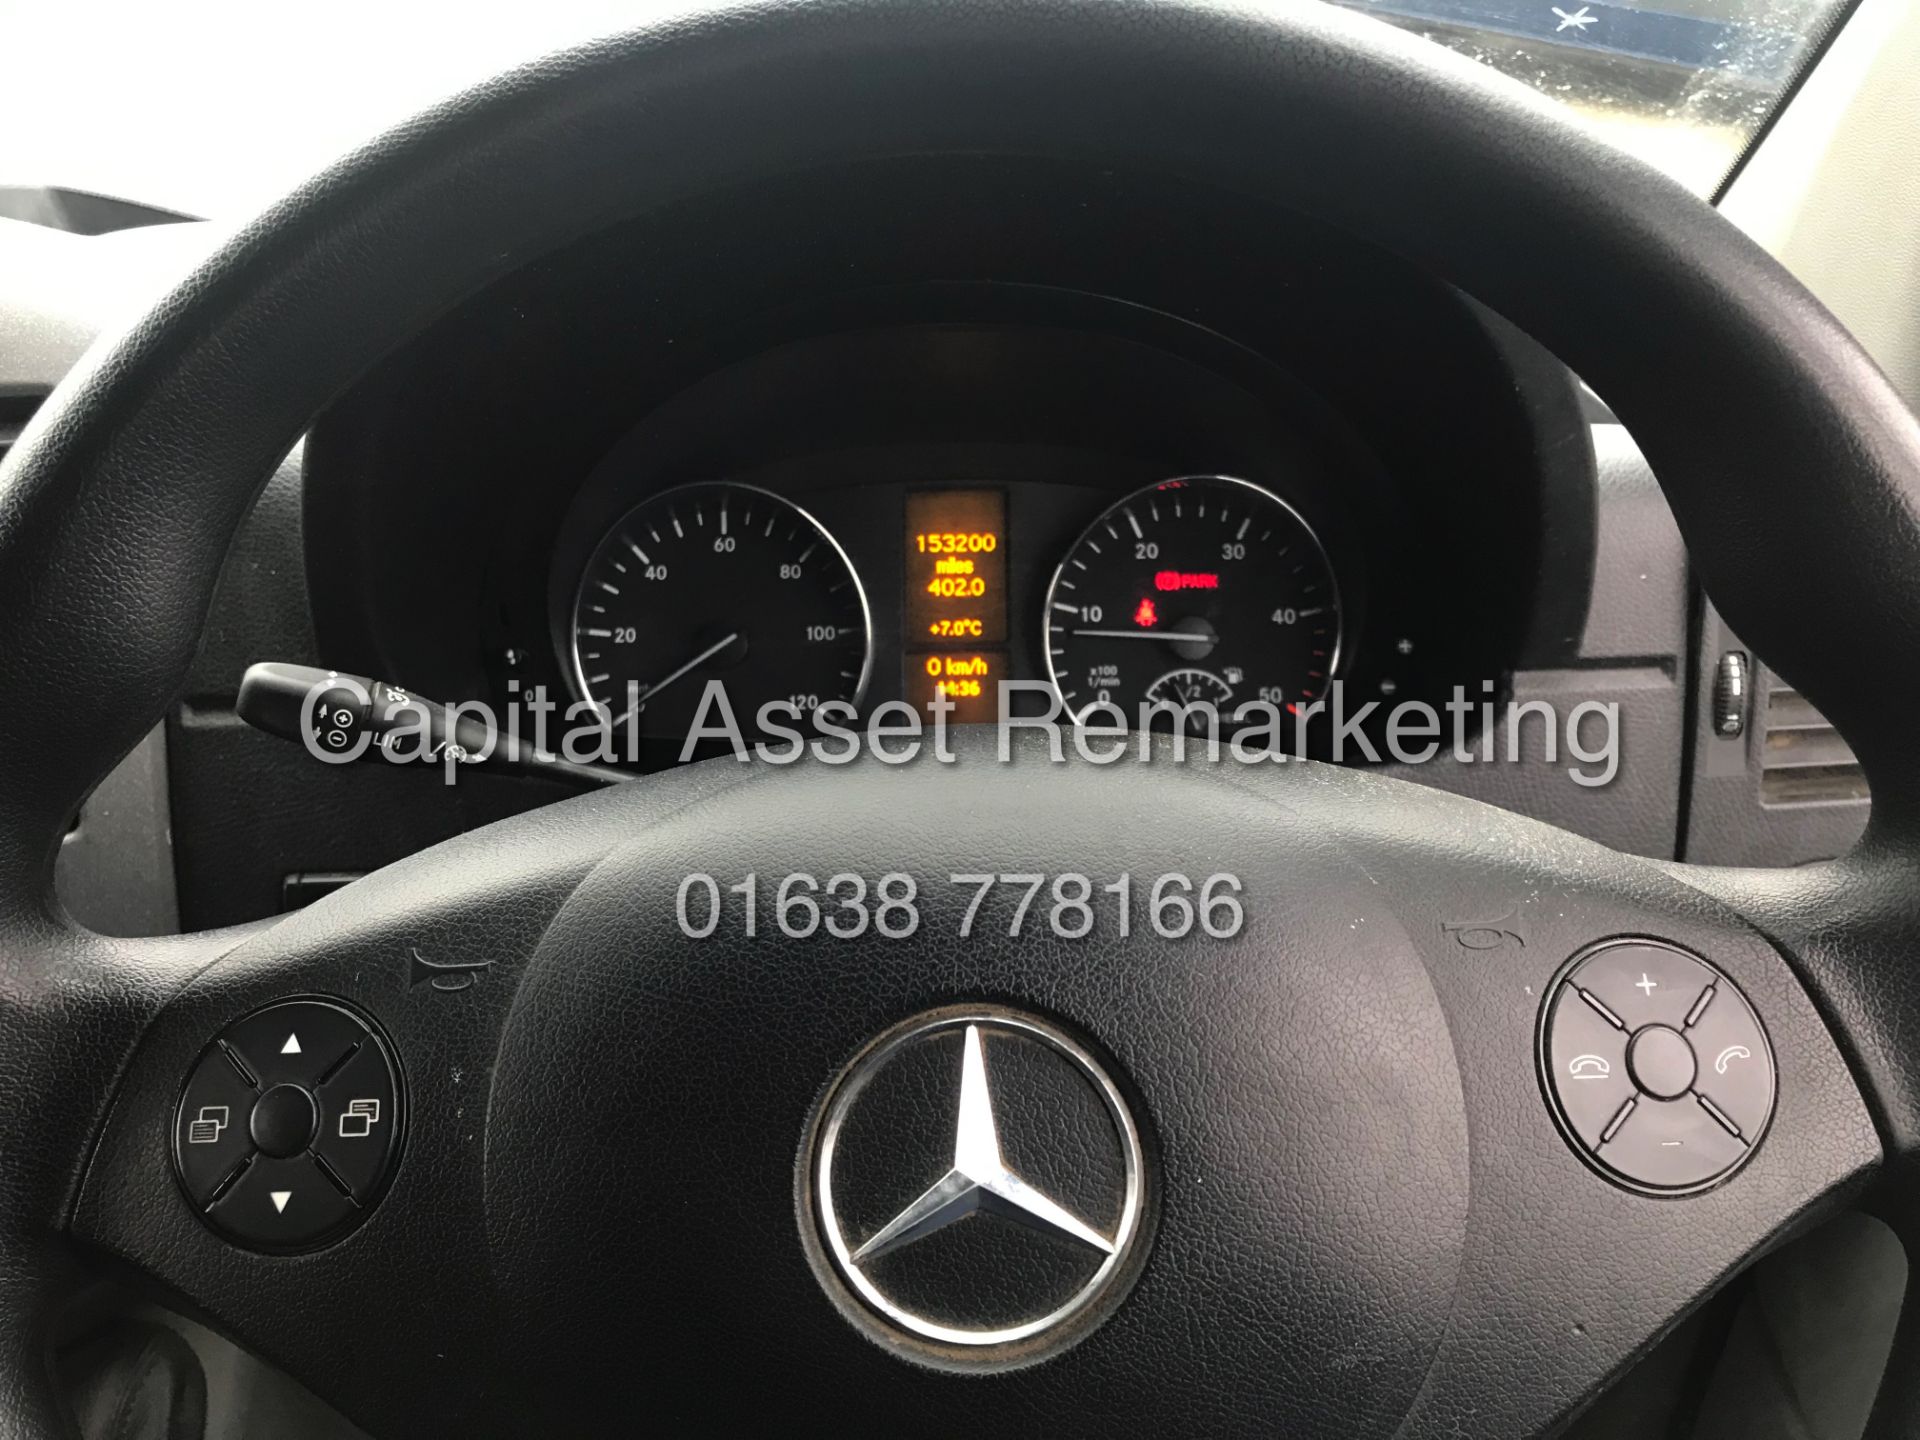 (ON SALE) MERCEDES SPRINTER 313CDI "130BHP" 1 OWNER (2016 MODEL) SAT NAV-AIR CON *IDEAL CONVERSION?* - Image 10 of 13